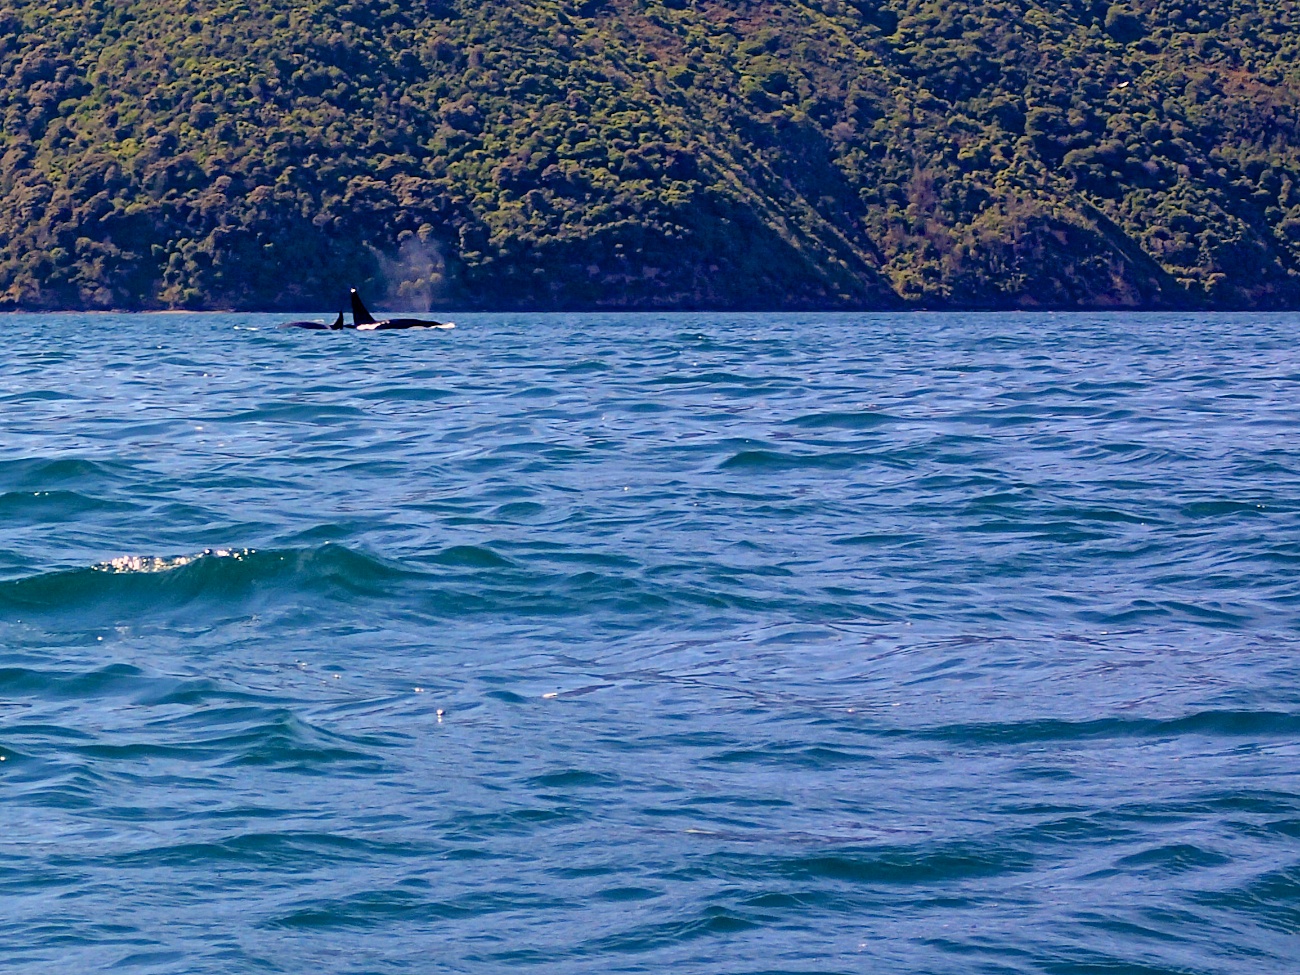 Kayaking with Orcas in Queen Charlotte Sound